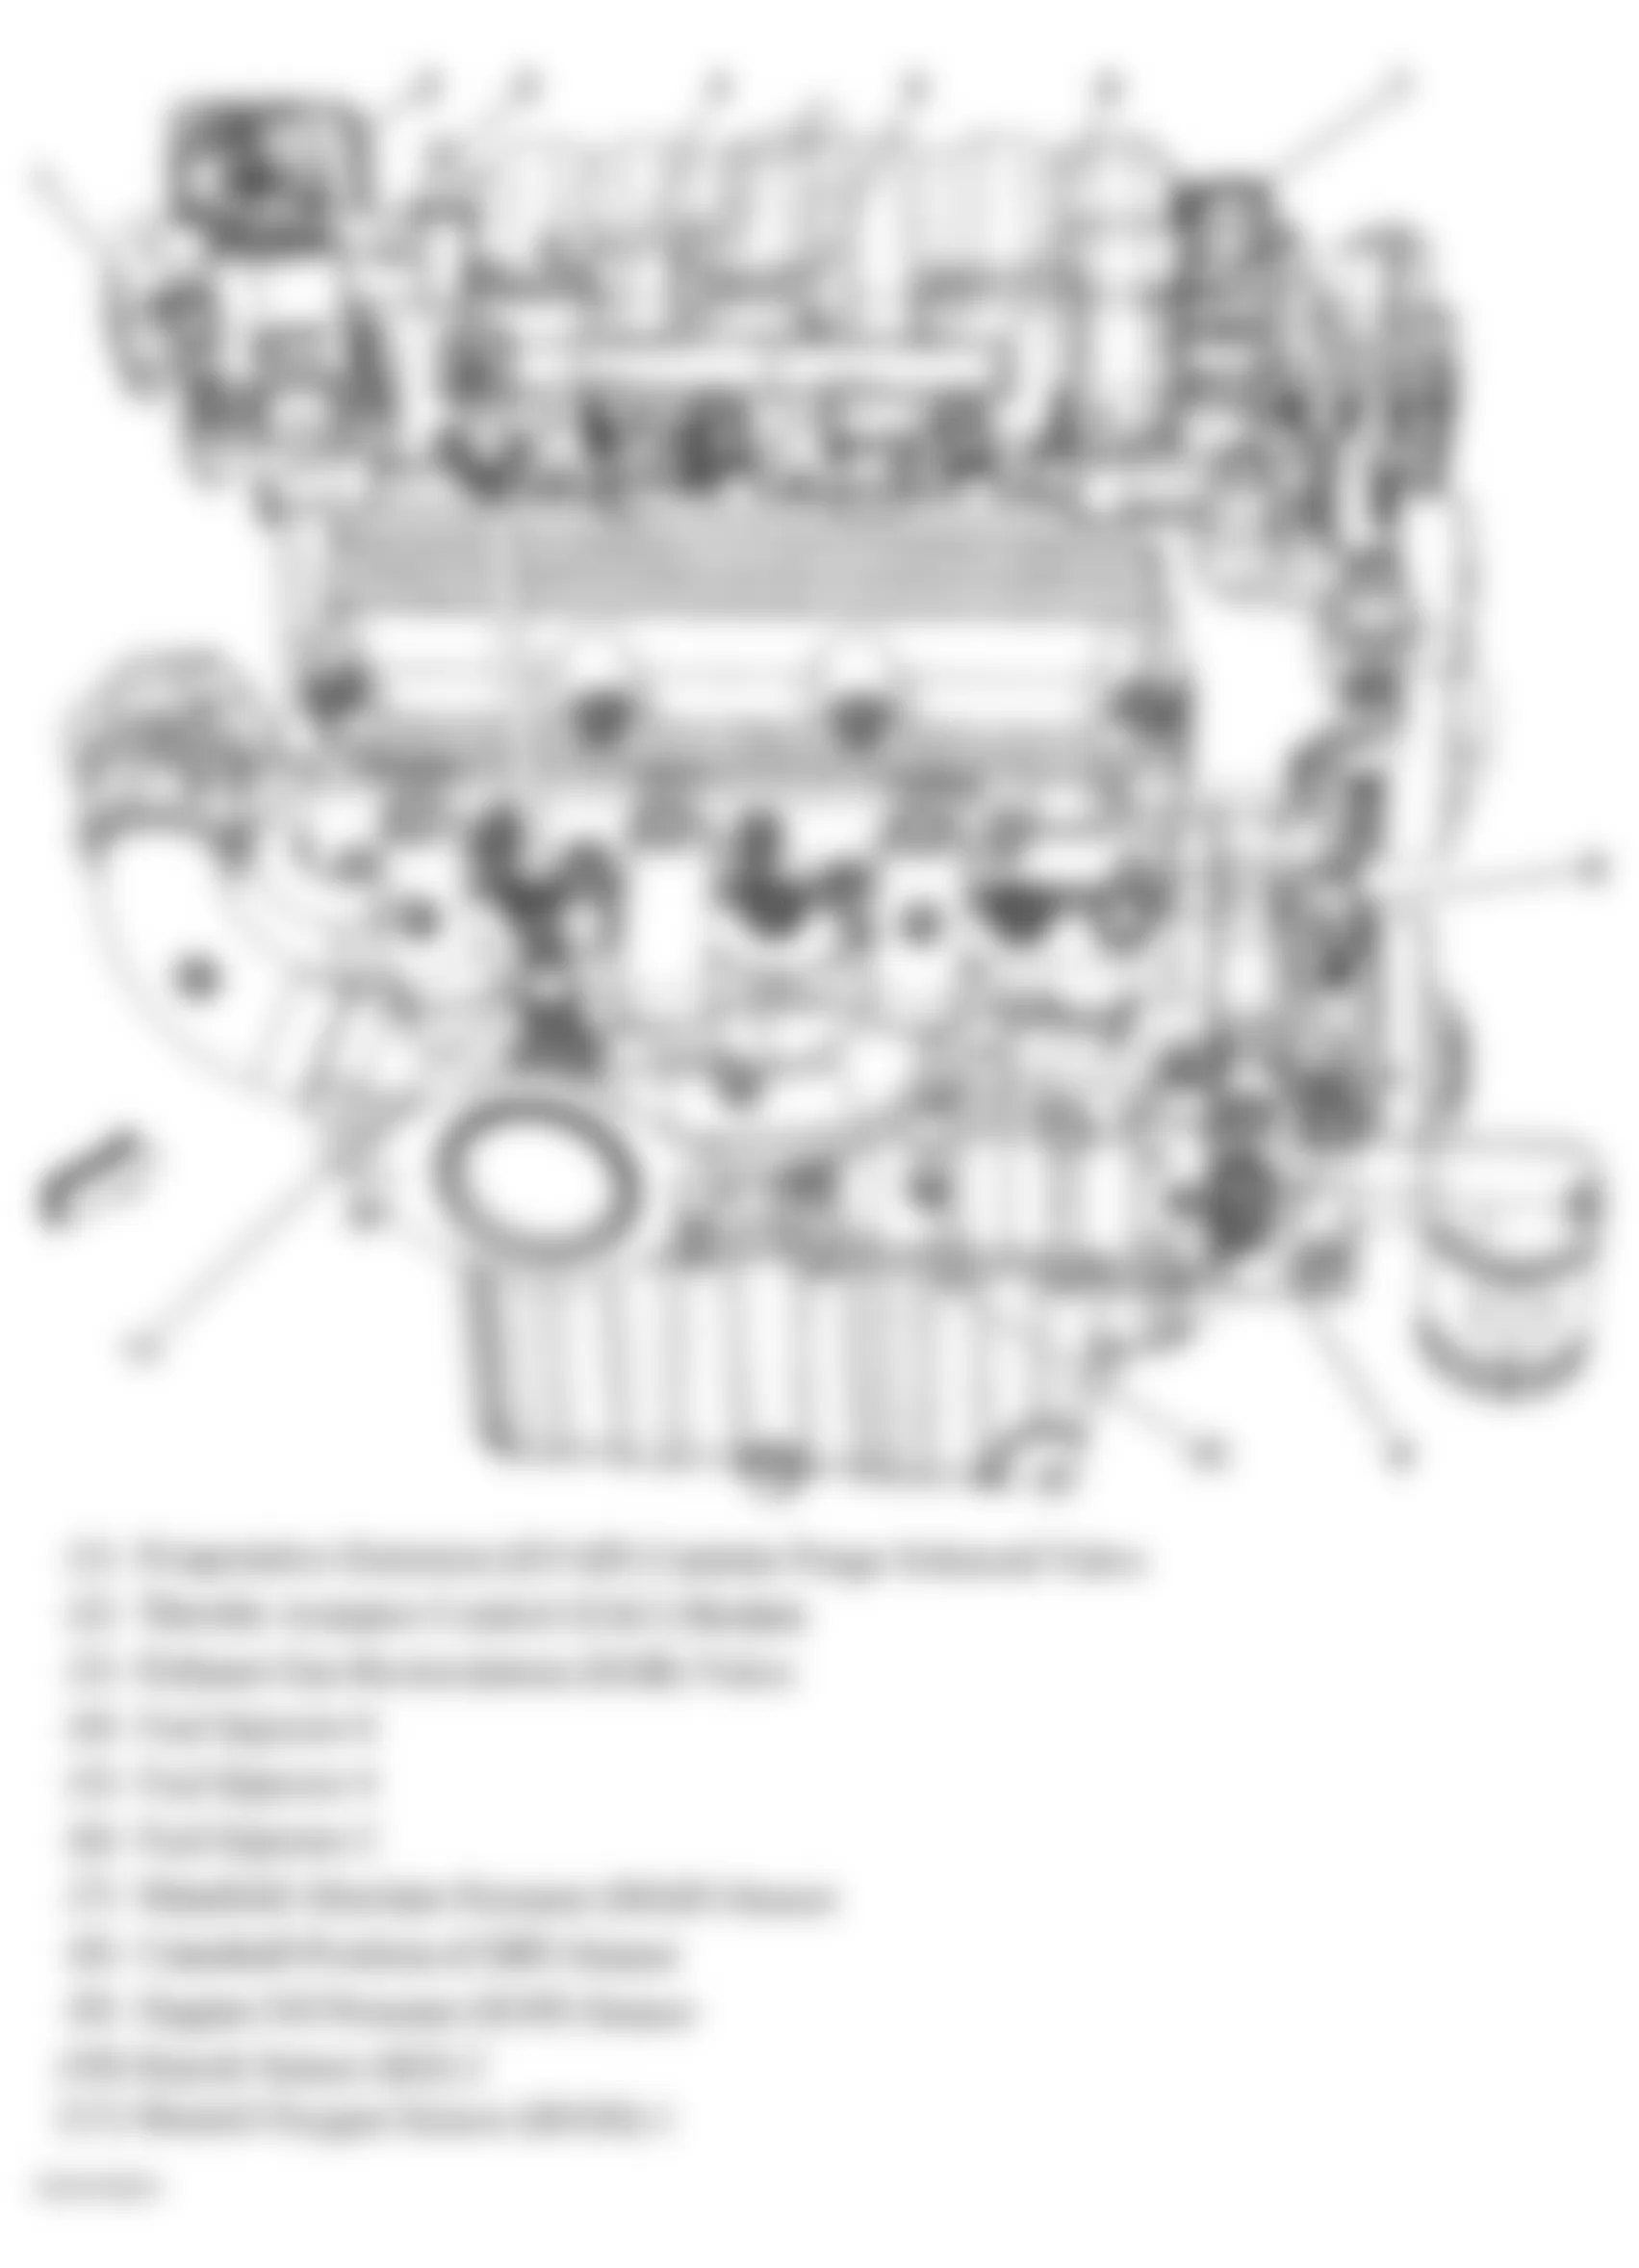 Buick Lucerne CXL 2008 - Component Locations -  Right Side Of Engine (3.8L)